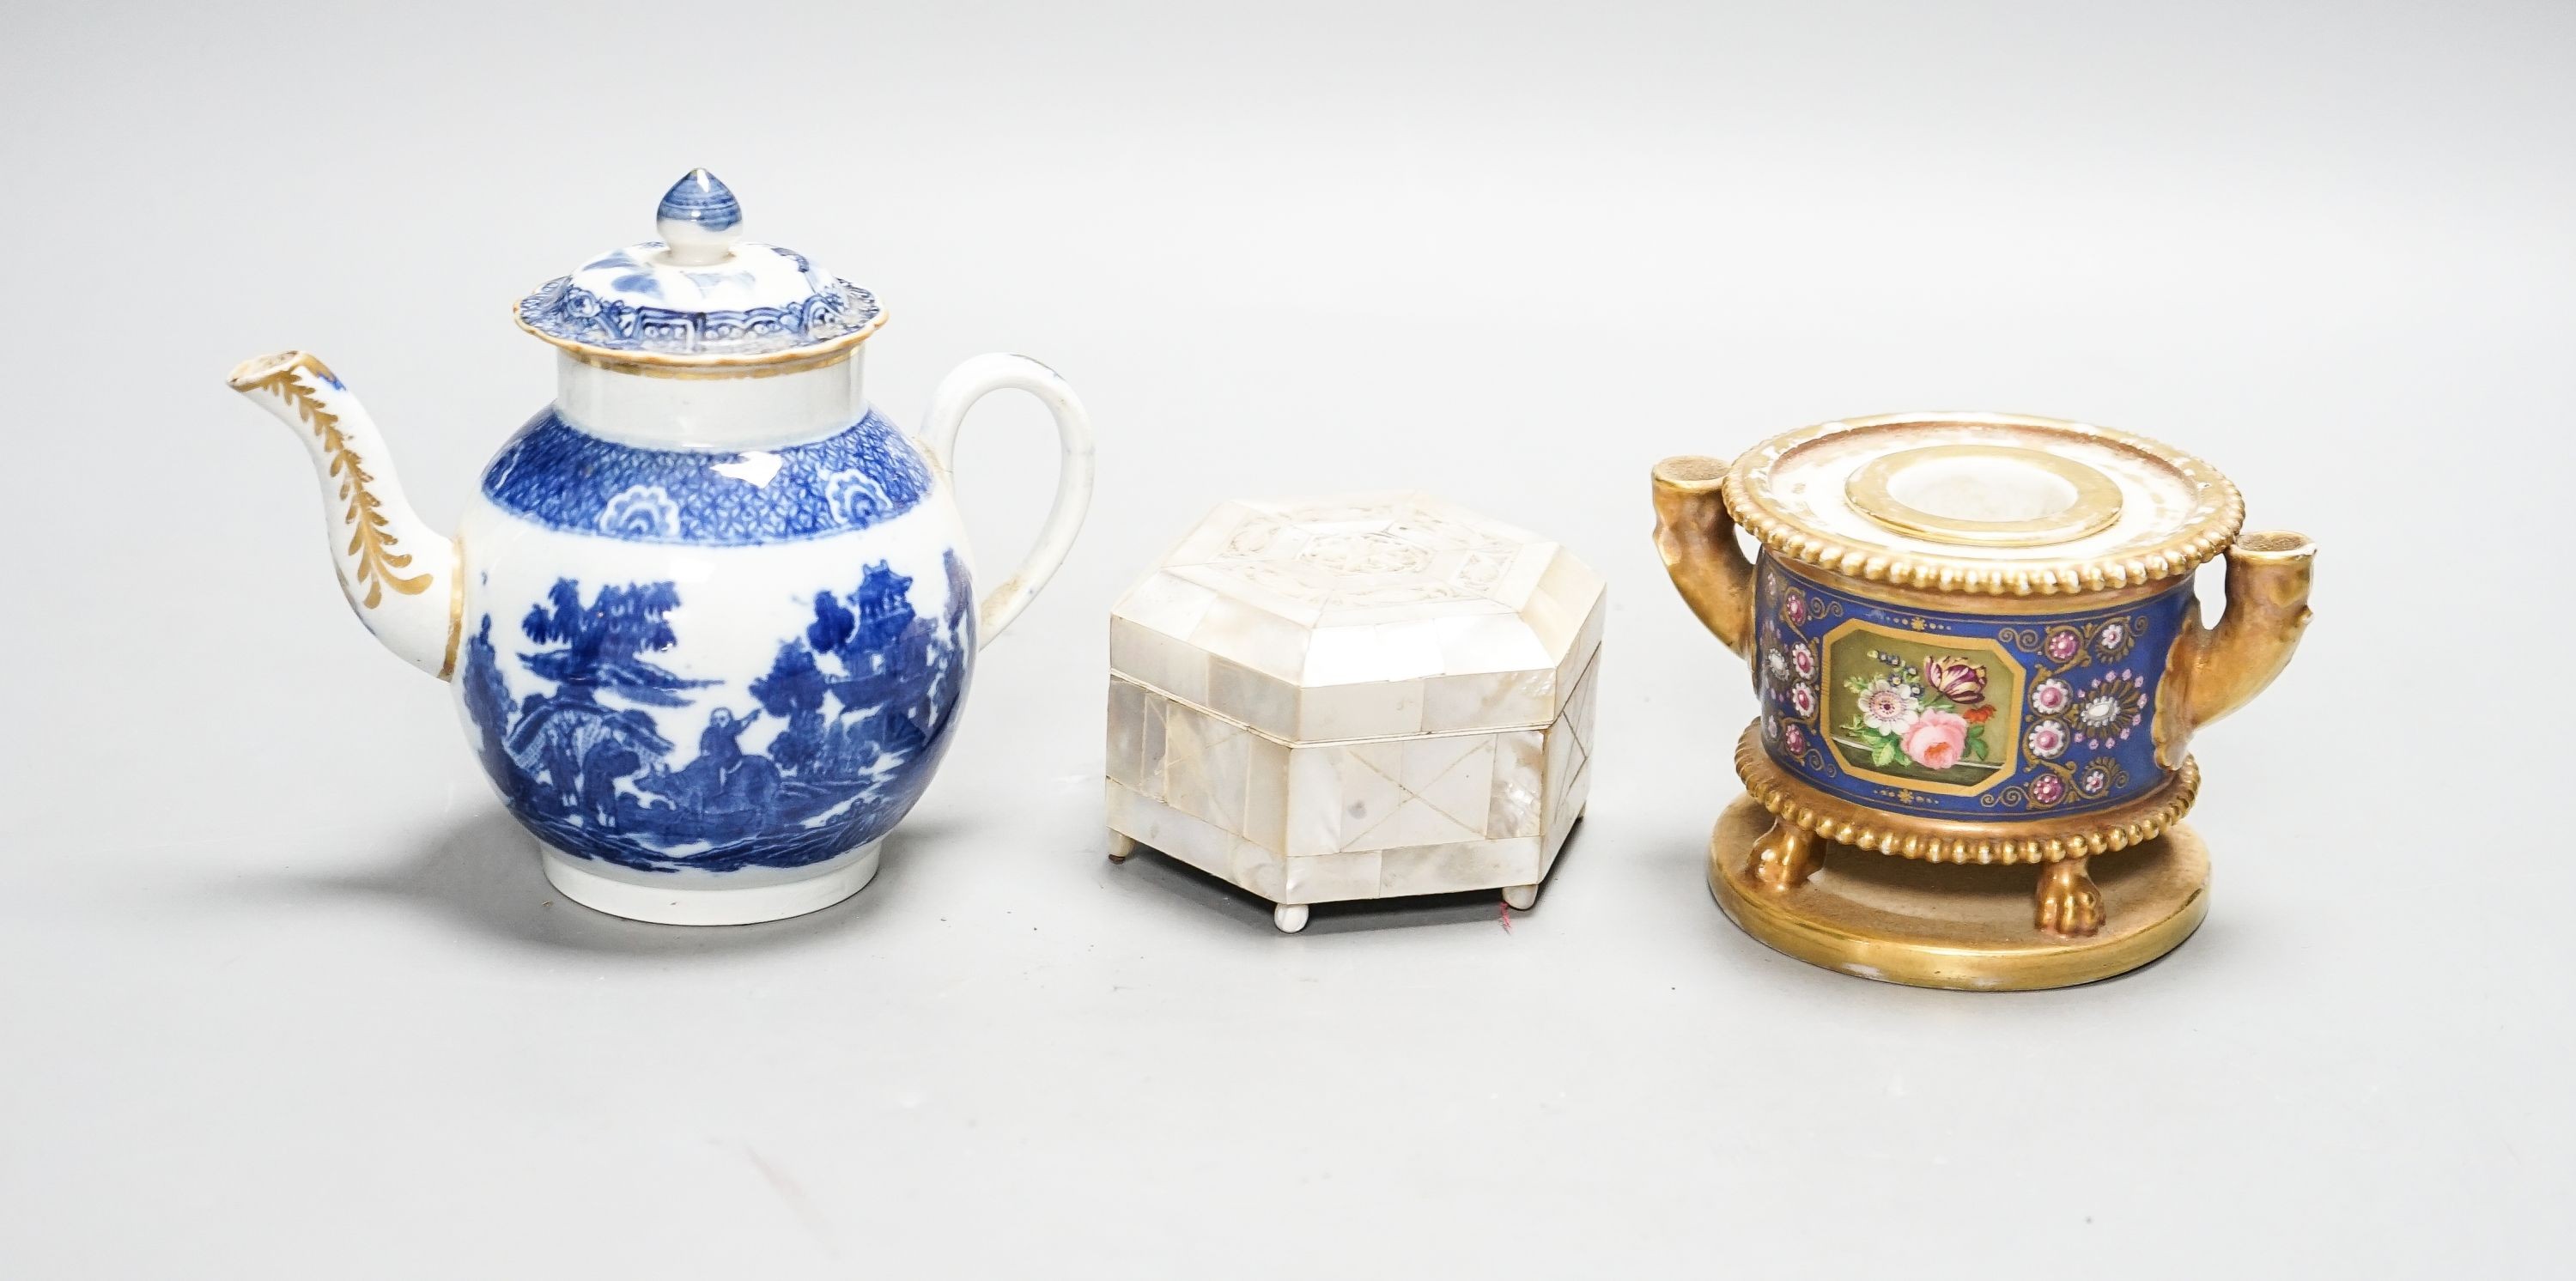 A Schoelcher Paris porcelain inkwell on stand, an 18th blue and white miniature teapot and a hexagonal mother of pearl lidded box (3)